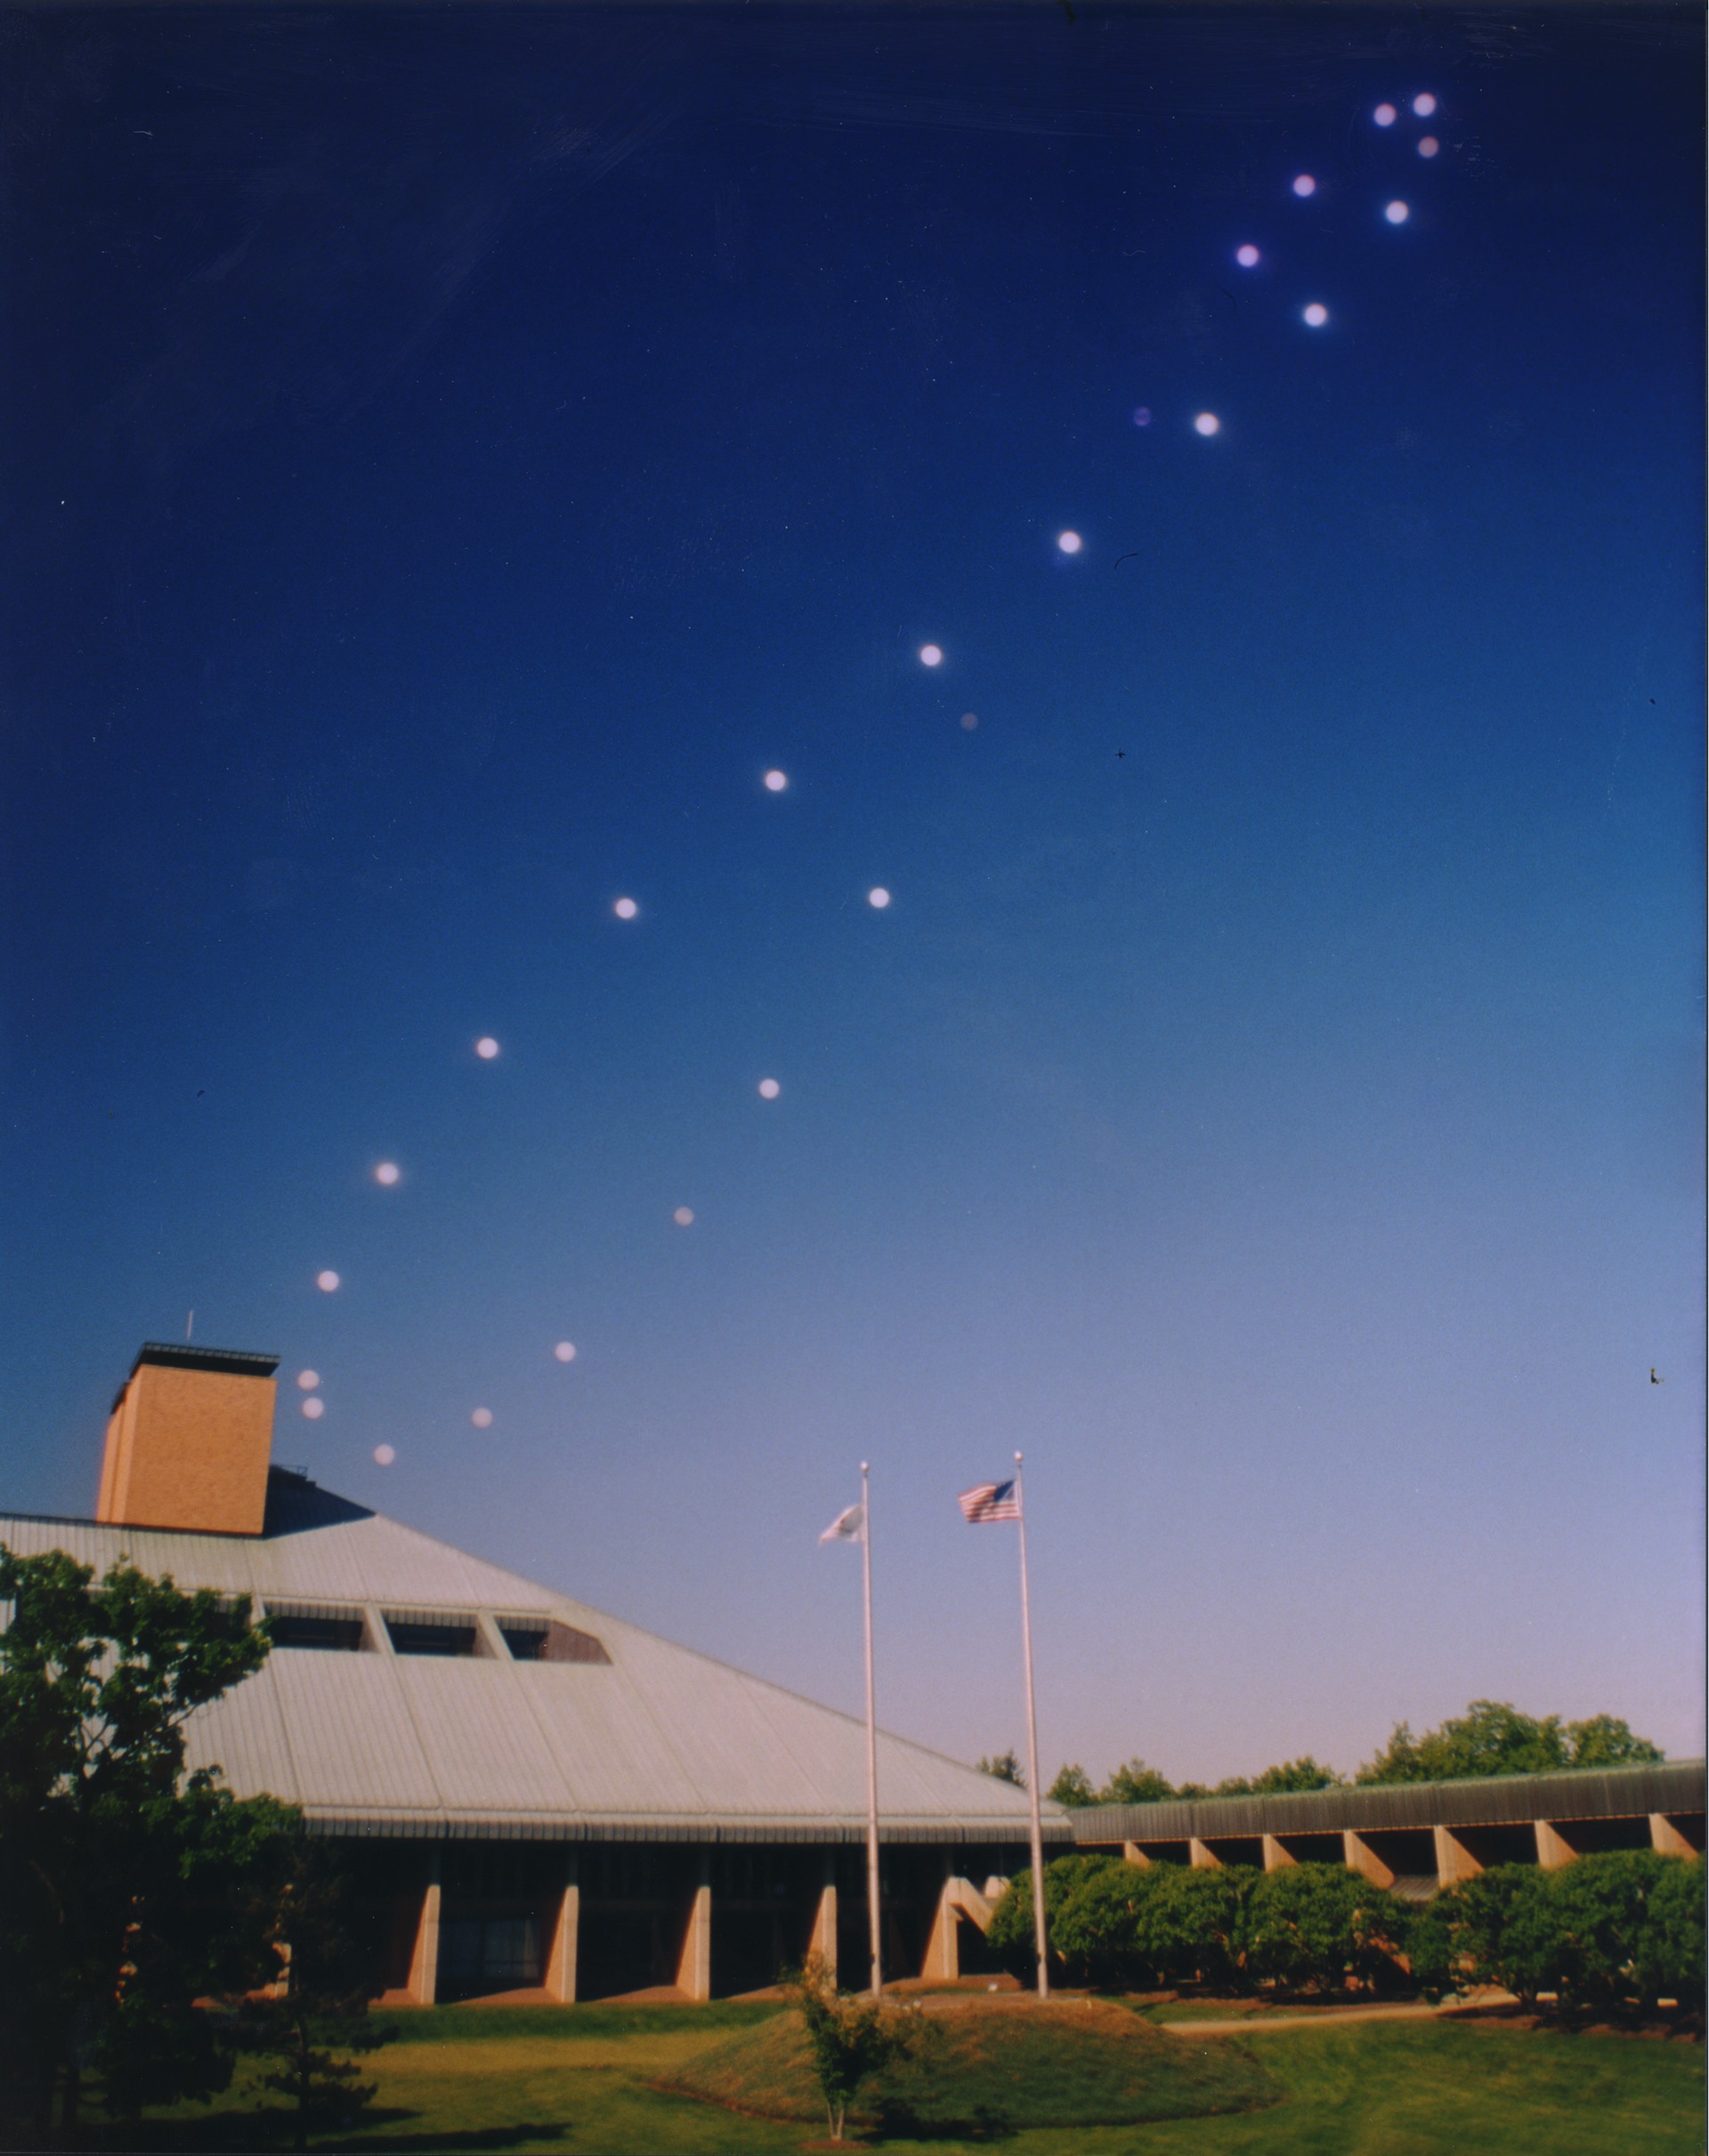 Analemma photo taken from 1998 to 1999 from Bell Laboratories, Murray Hill.